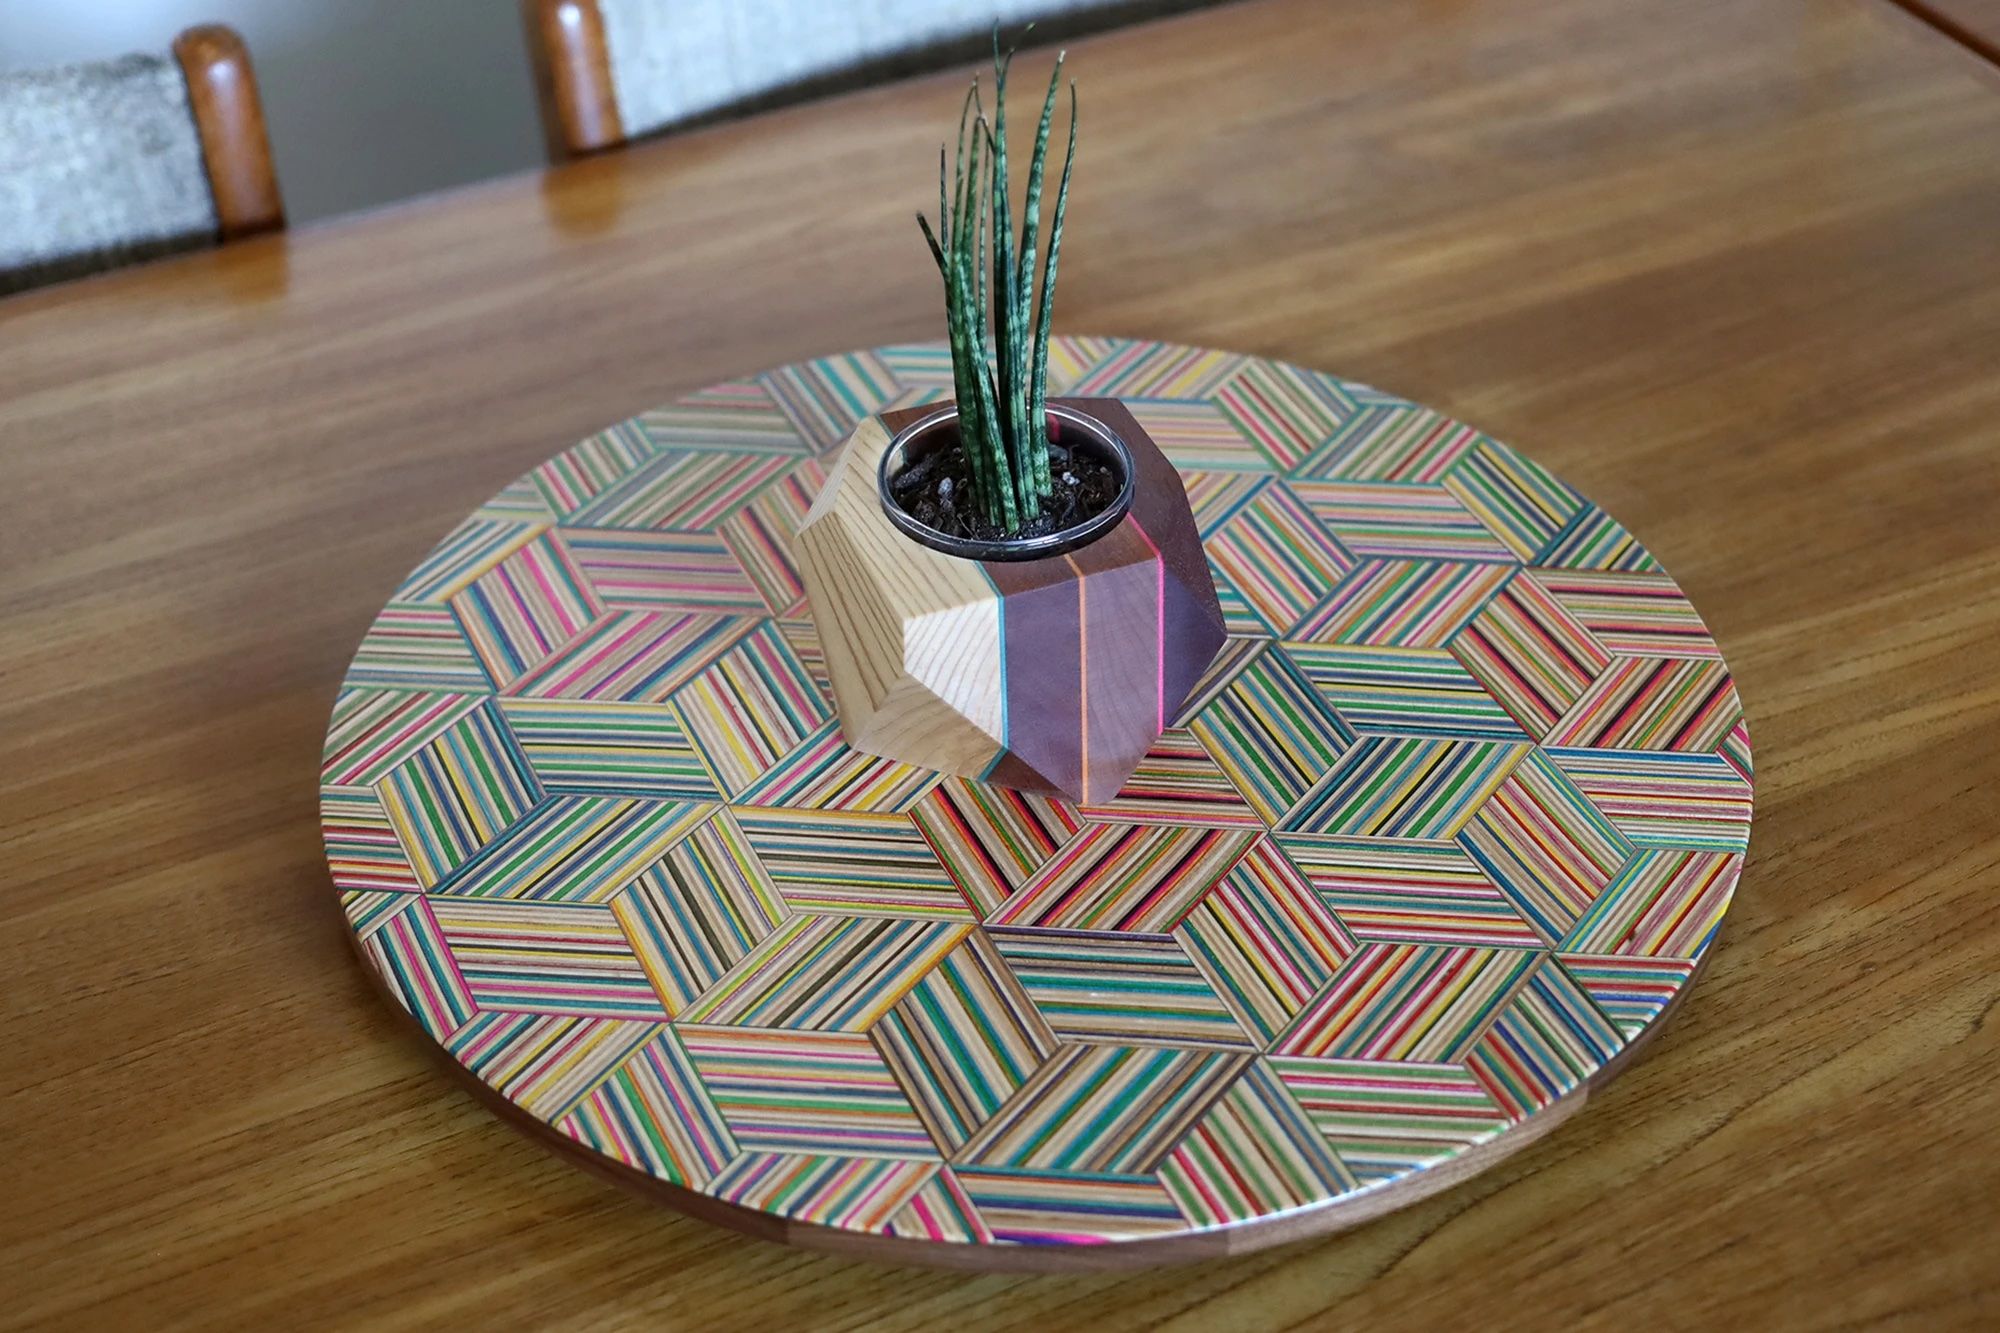 A colourful lazy susan made from upcycled skateboards on a wooden table with a plant on top.